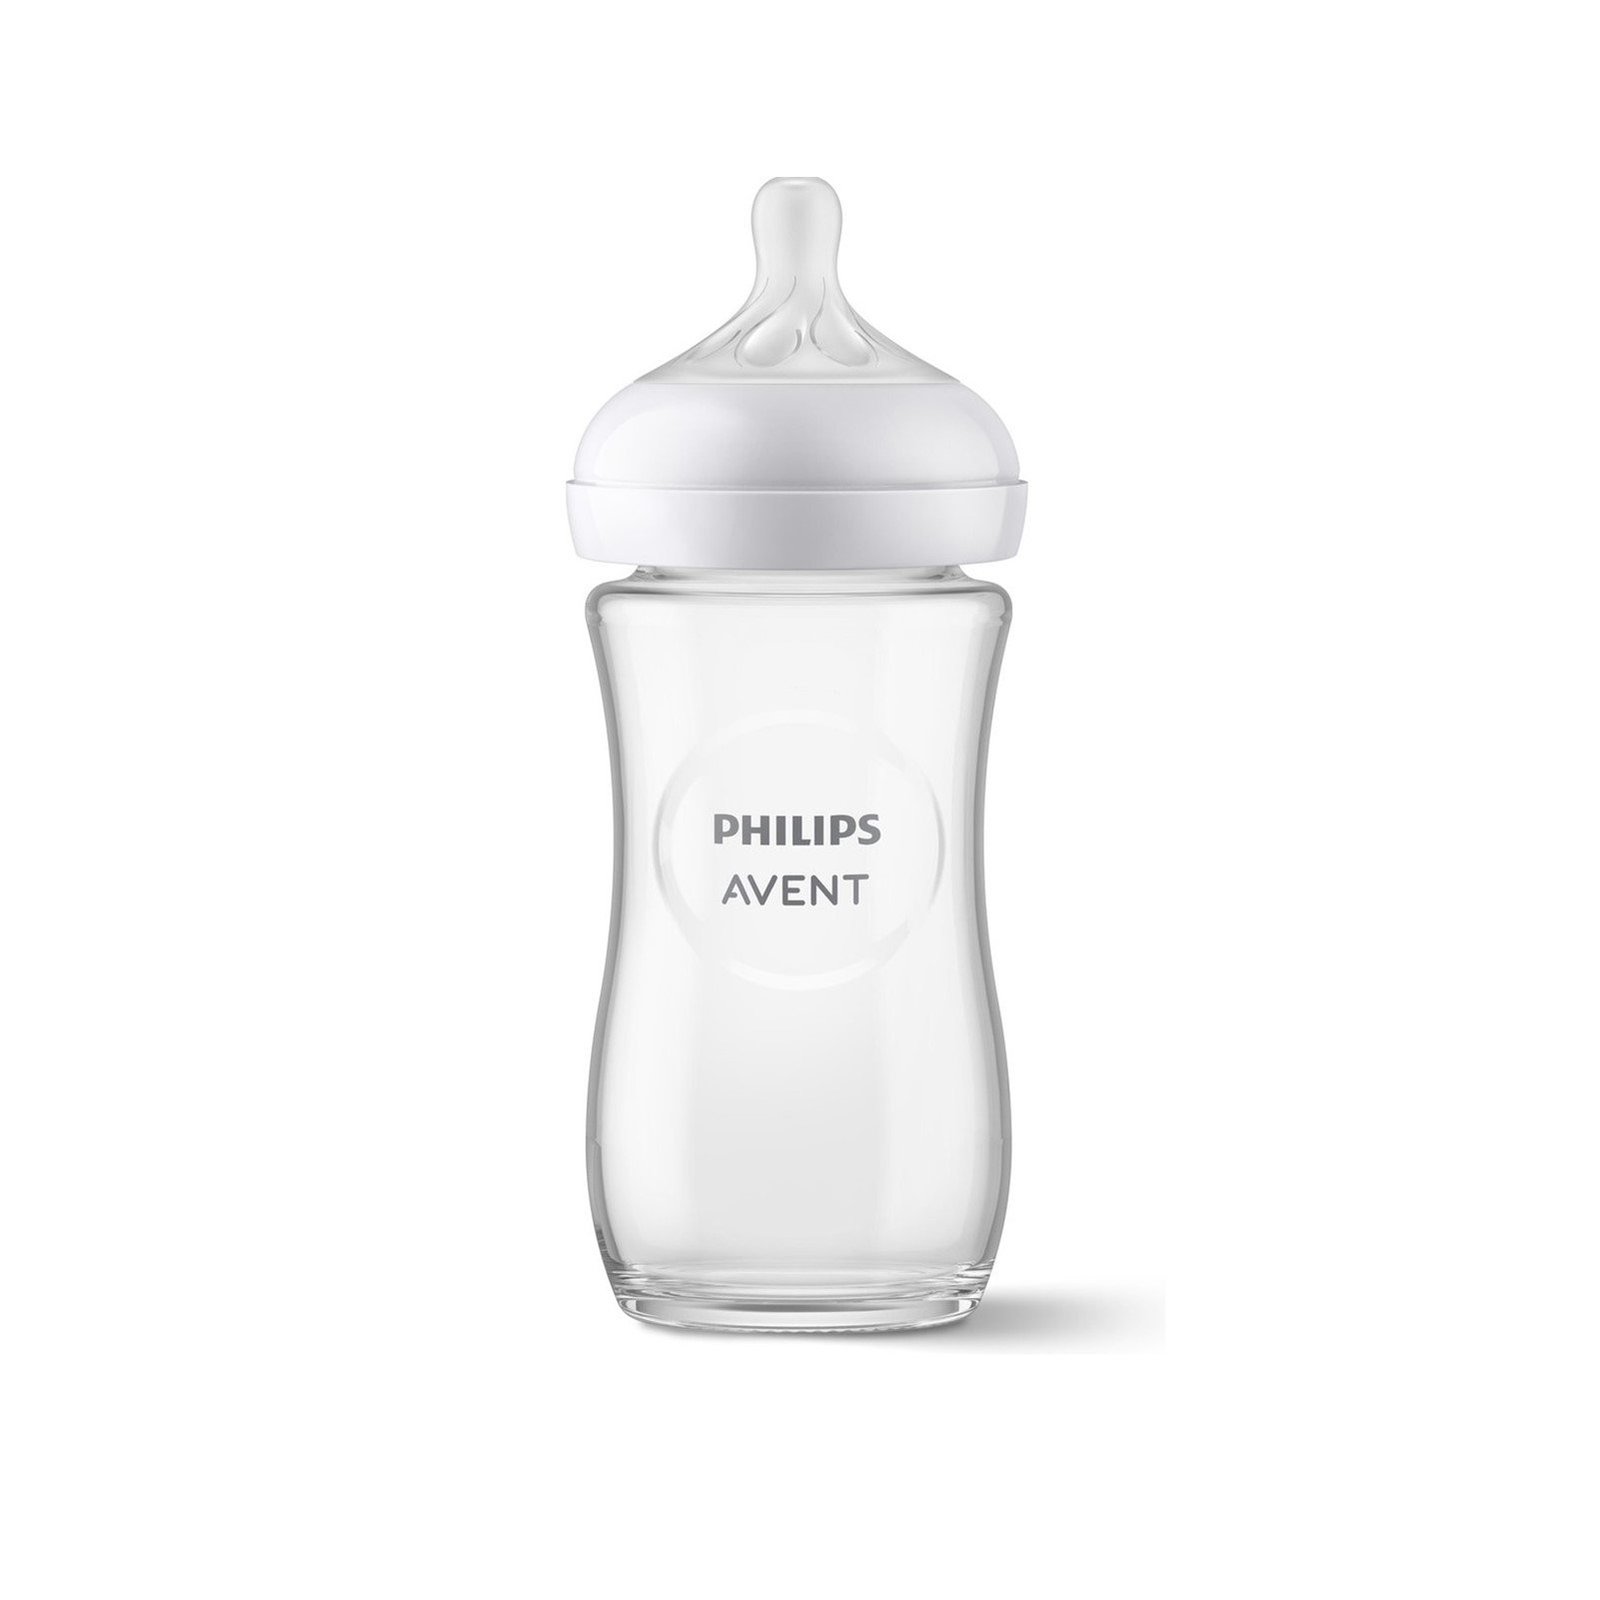 https://static.beautytocare.com/cdn-cgi/image/width=1600,height=1600,f=auto/media/catalog/product//p/h/philips-avent-natural-response-pure-glass-baby-bottle-1m-240ml.jpg